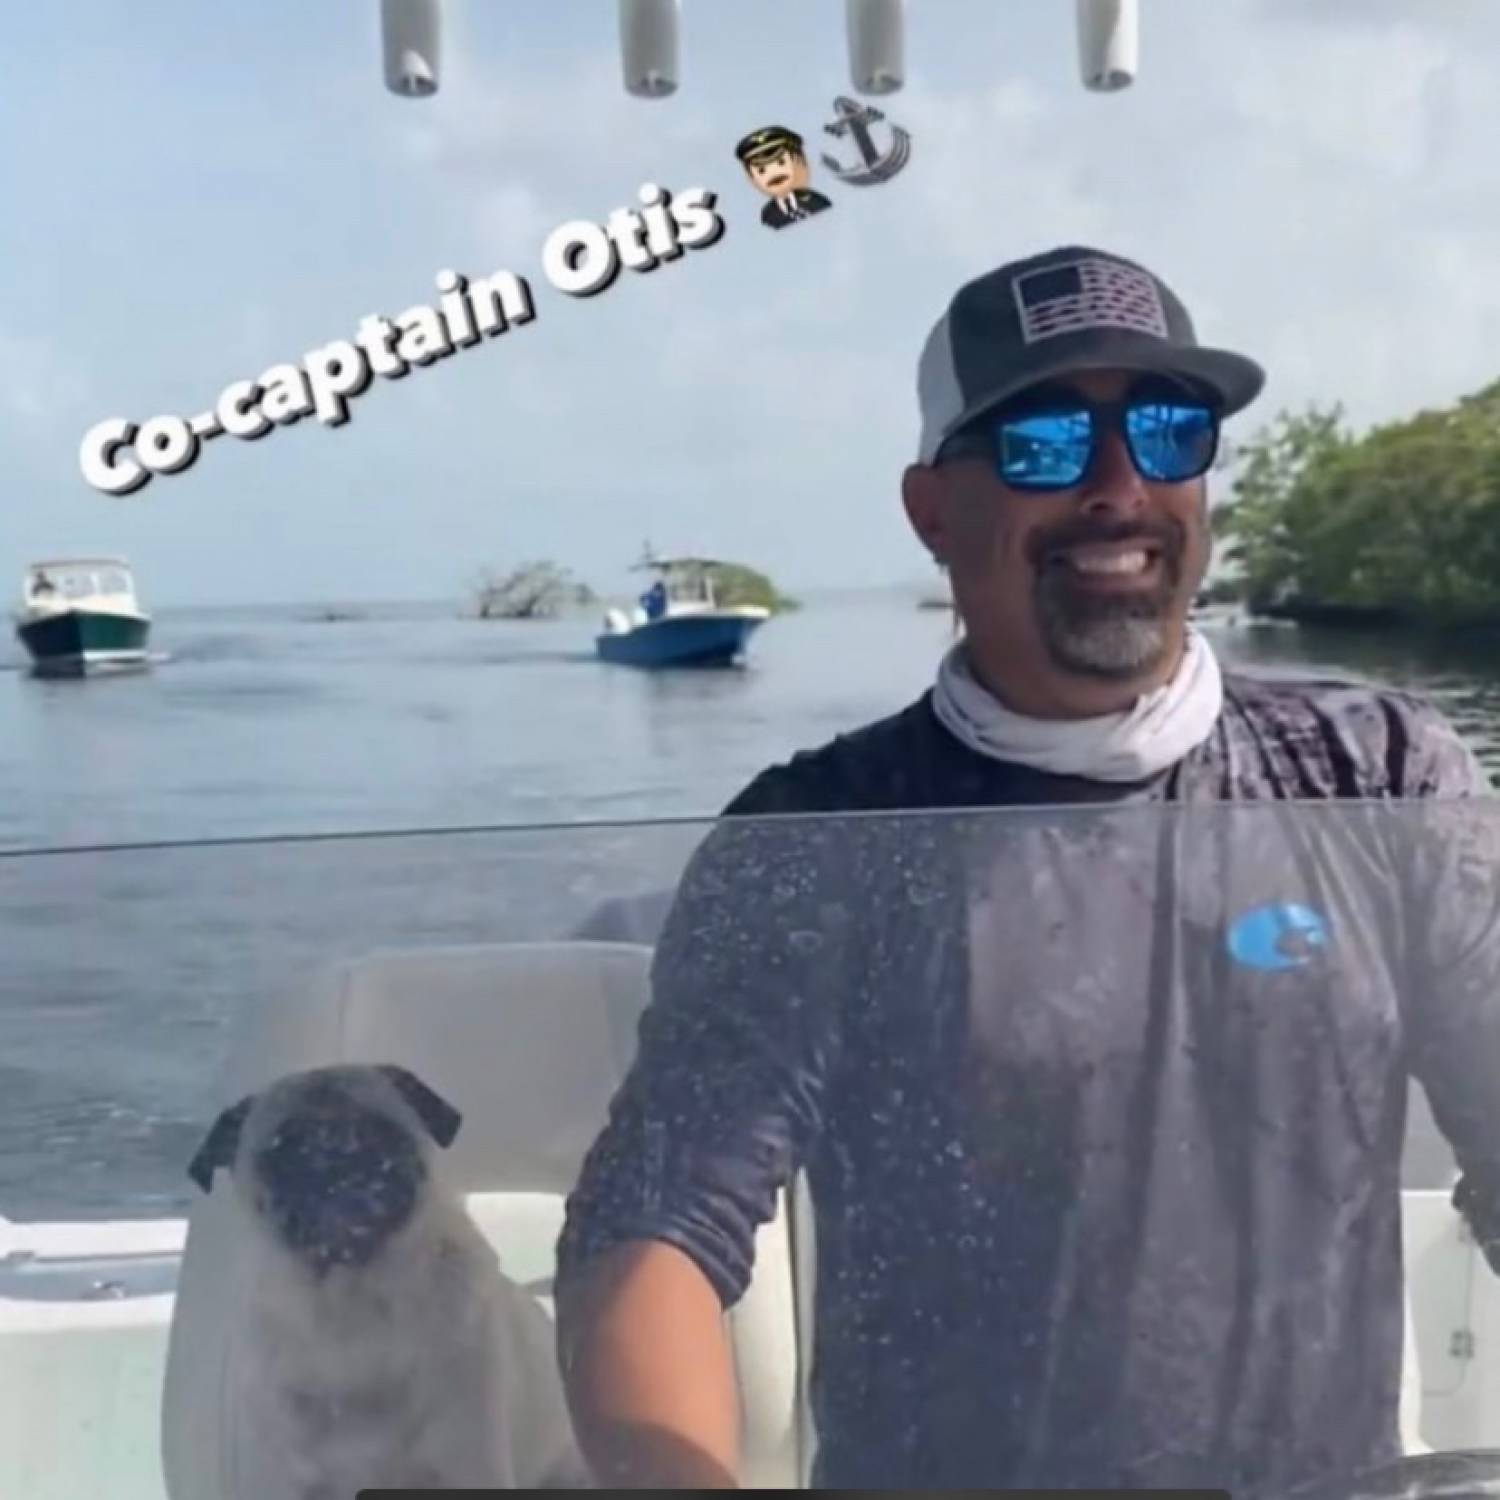 Title: Co Captain Otis the Pug on the way to the sandbar - On board their Sportsman Open 232 Center Console - Location: Miami Florida, Black Point Marina. Participating in the Photo Contest #SportsmanFebruary2022